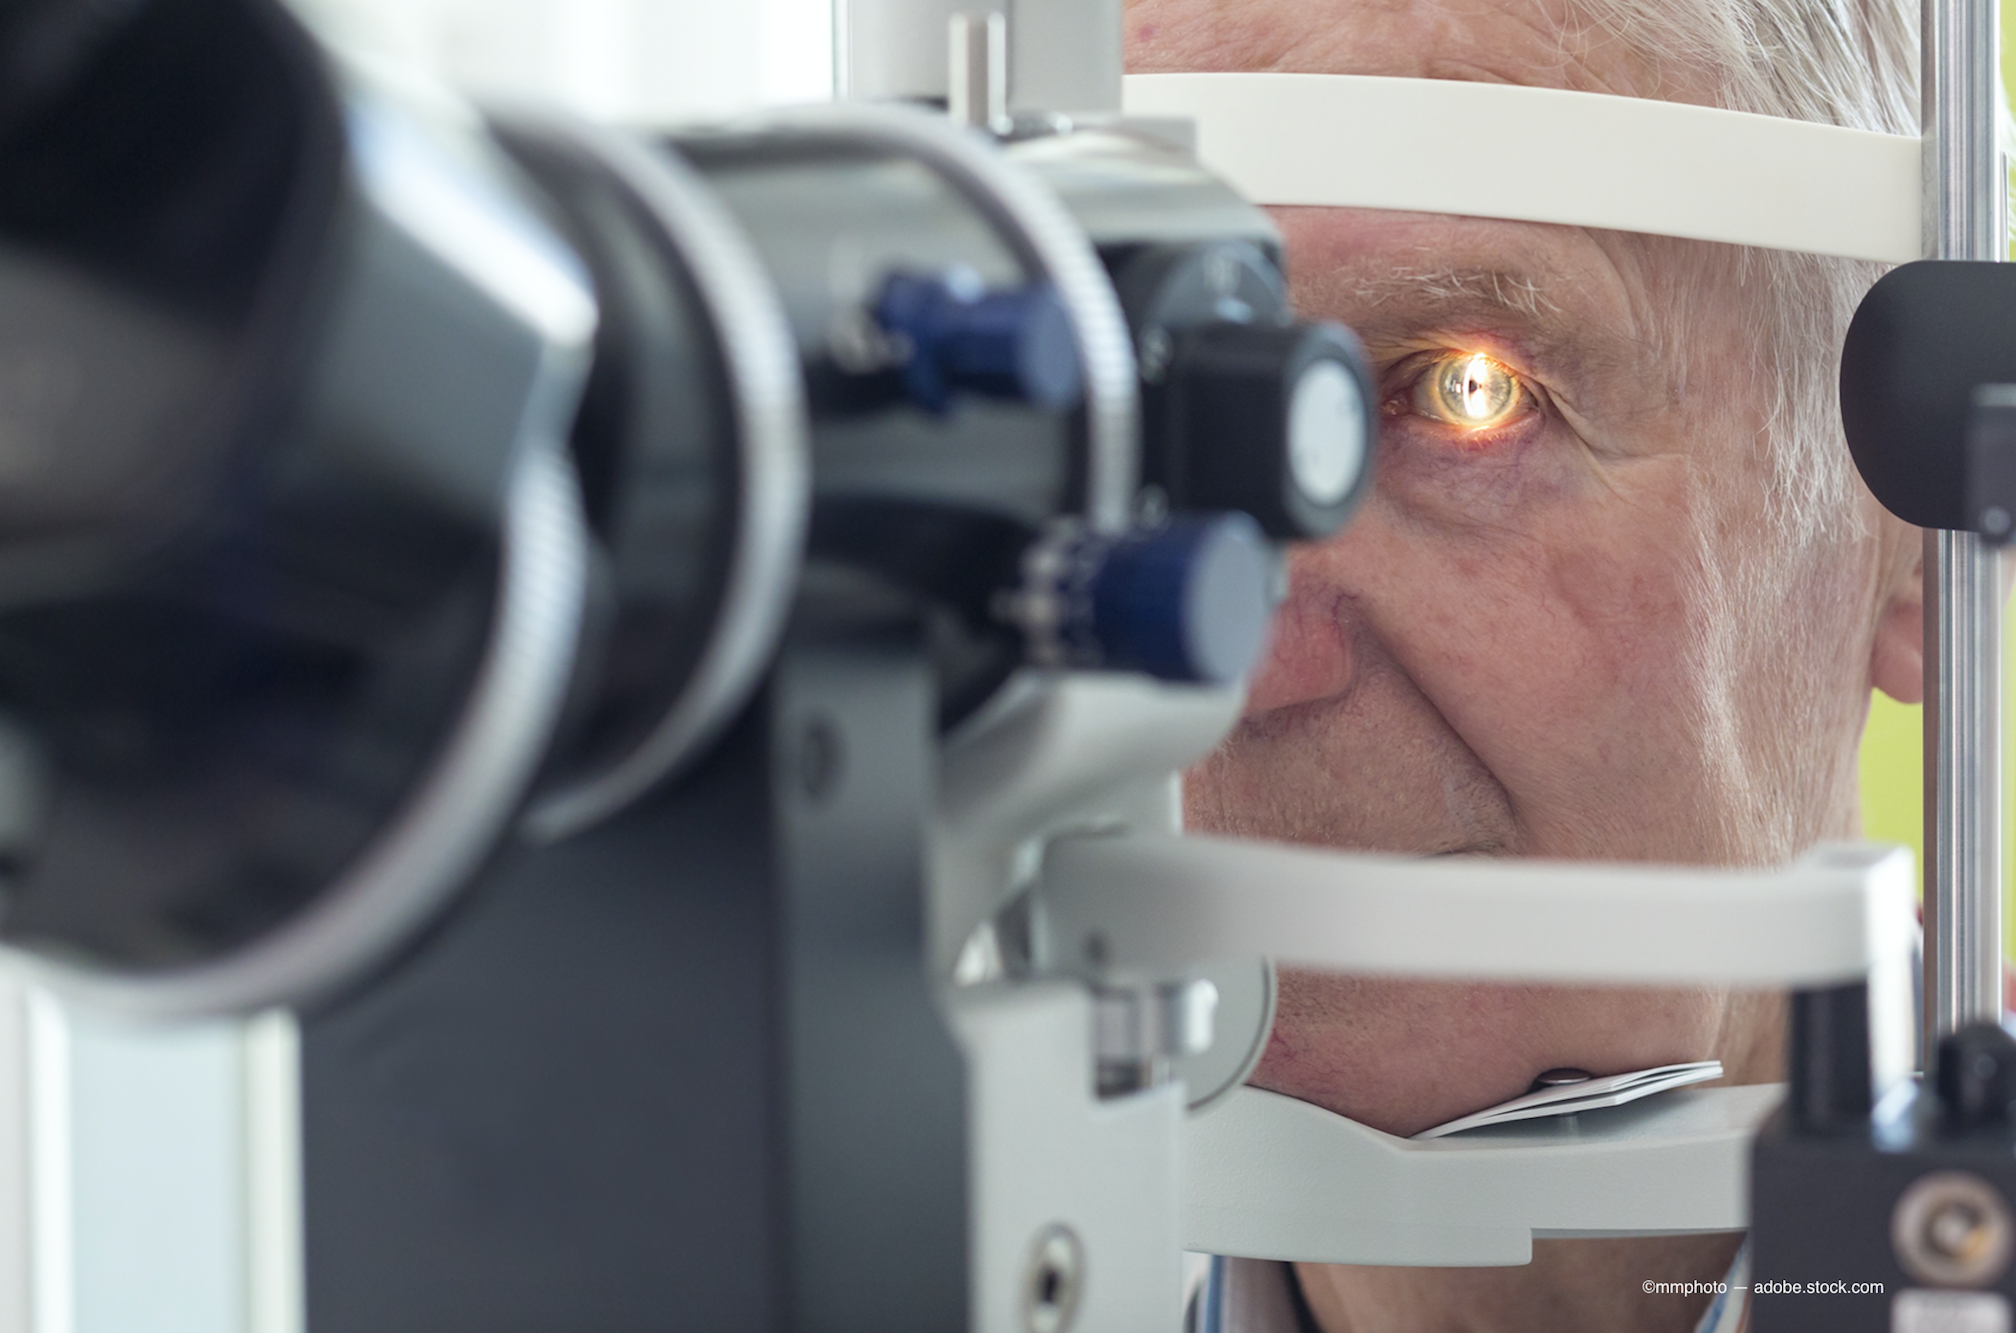 6 steps to prepare former LASIK patients for cataract surgery